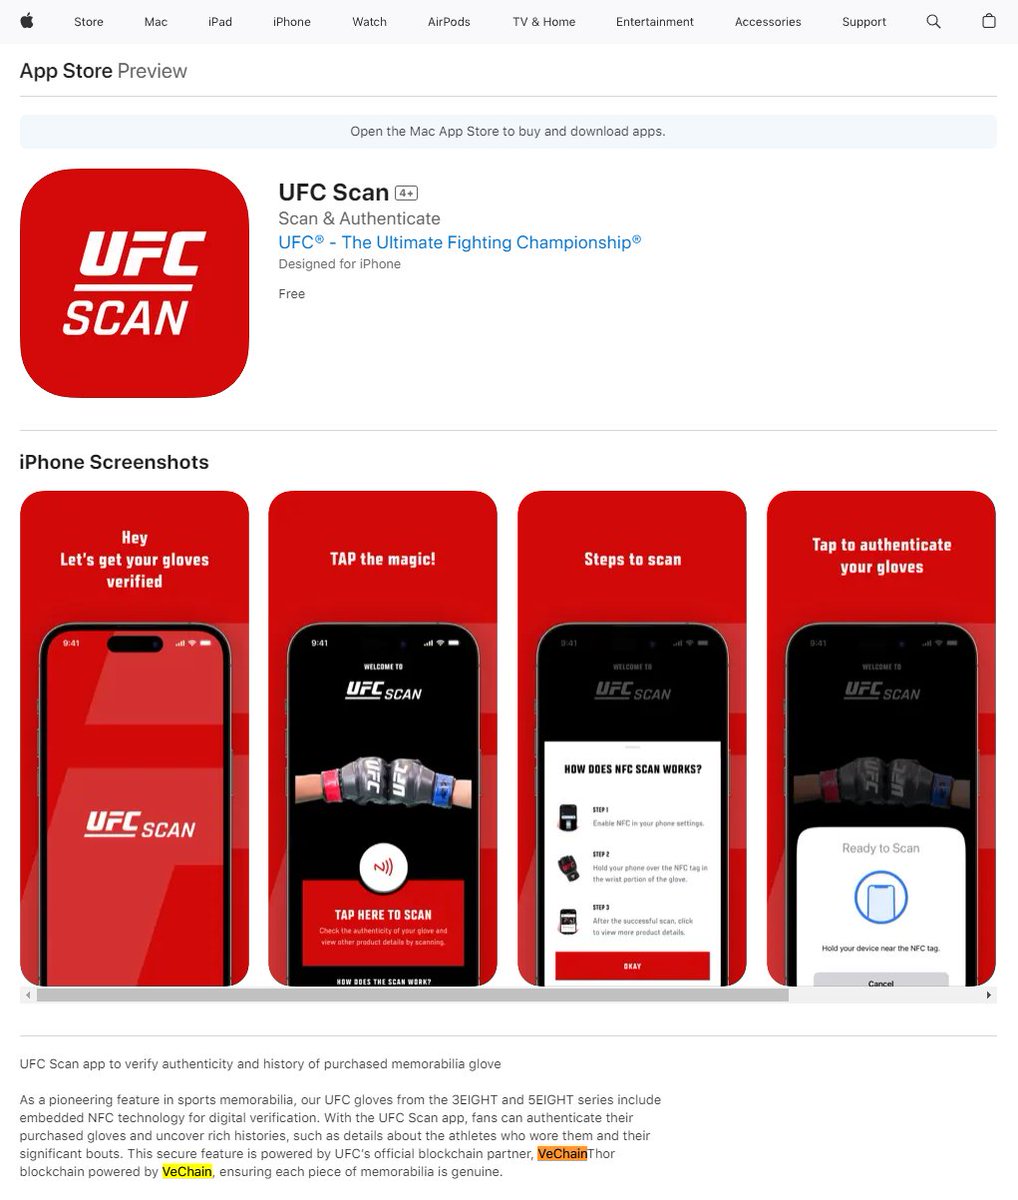 VeChain x UFC Scan 🥊 'Our UFC gloves from the #3EIGHT and #5EIGHT series include embedded NFC technology for digital verification, powered by UFC’s official #blockchain partner, VeChain.' ⛓️ #vechain $VET #UFC @ufc #Tech #Crypto #Bitcoin $BTC apps.apple.com/us/app/ufc-sca…